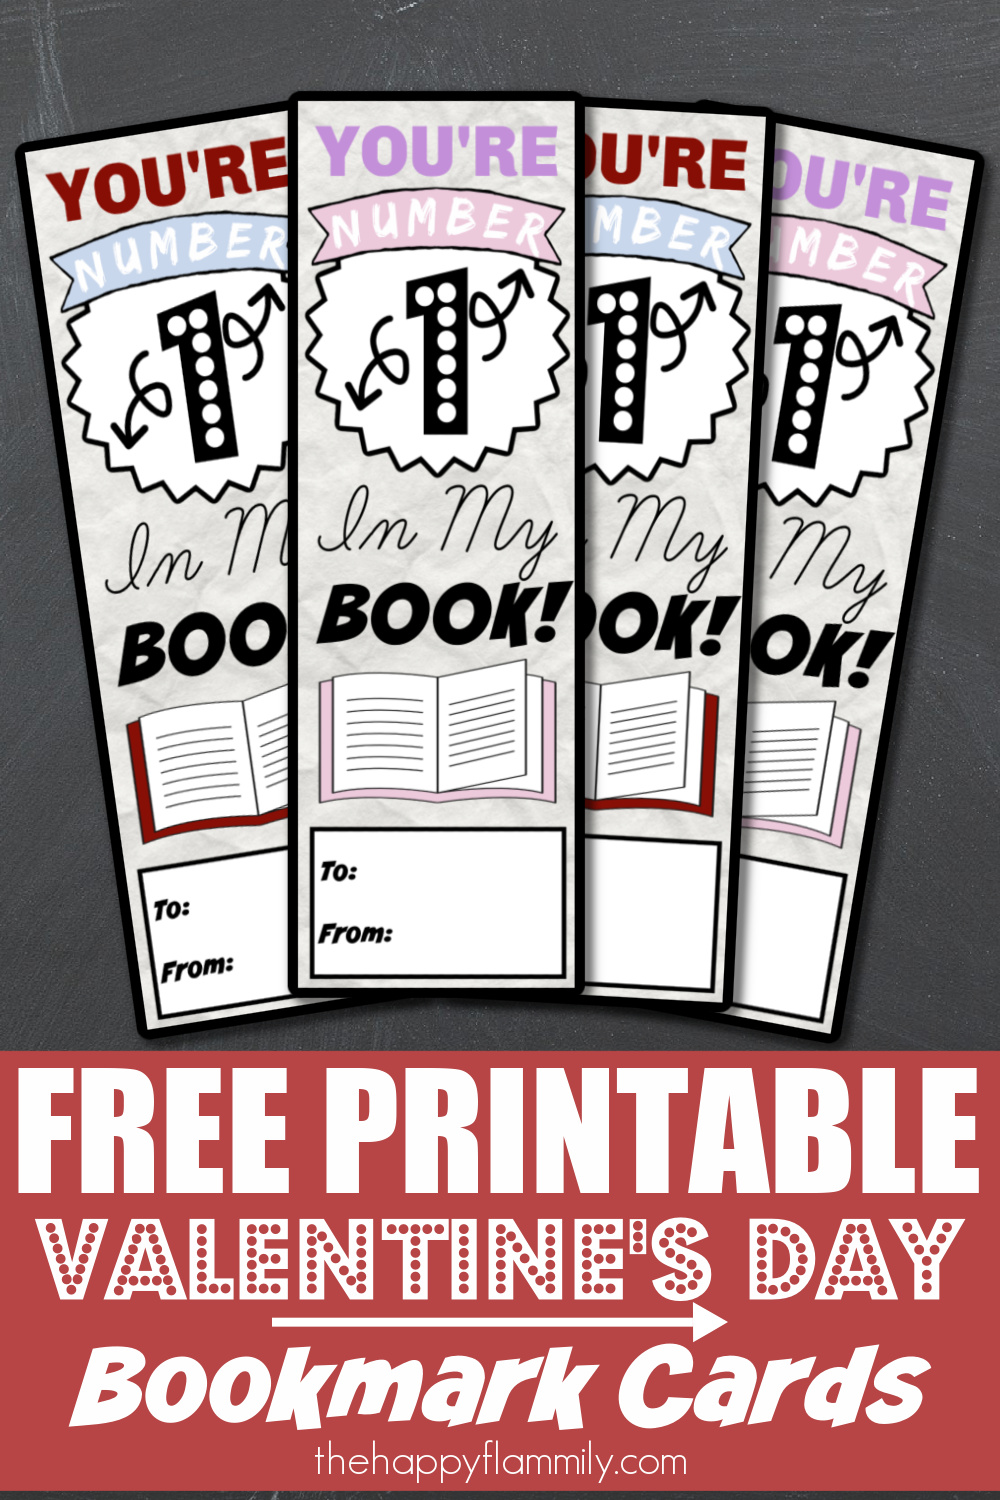 Valentine’s Day printable bookmarks. Free printable bookmarks. Valentine bookmarks. How to make valentine bookmarks. Homemade valentine bookmarks. Free printable cute bookmarks. #valentines #Books #bookmarks #valentinesday #valentinescards #school #class #education